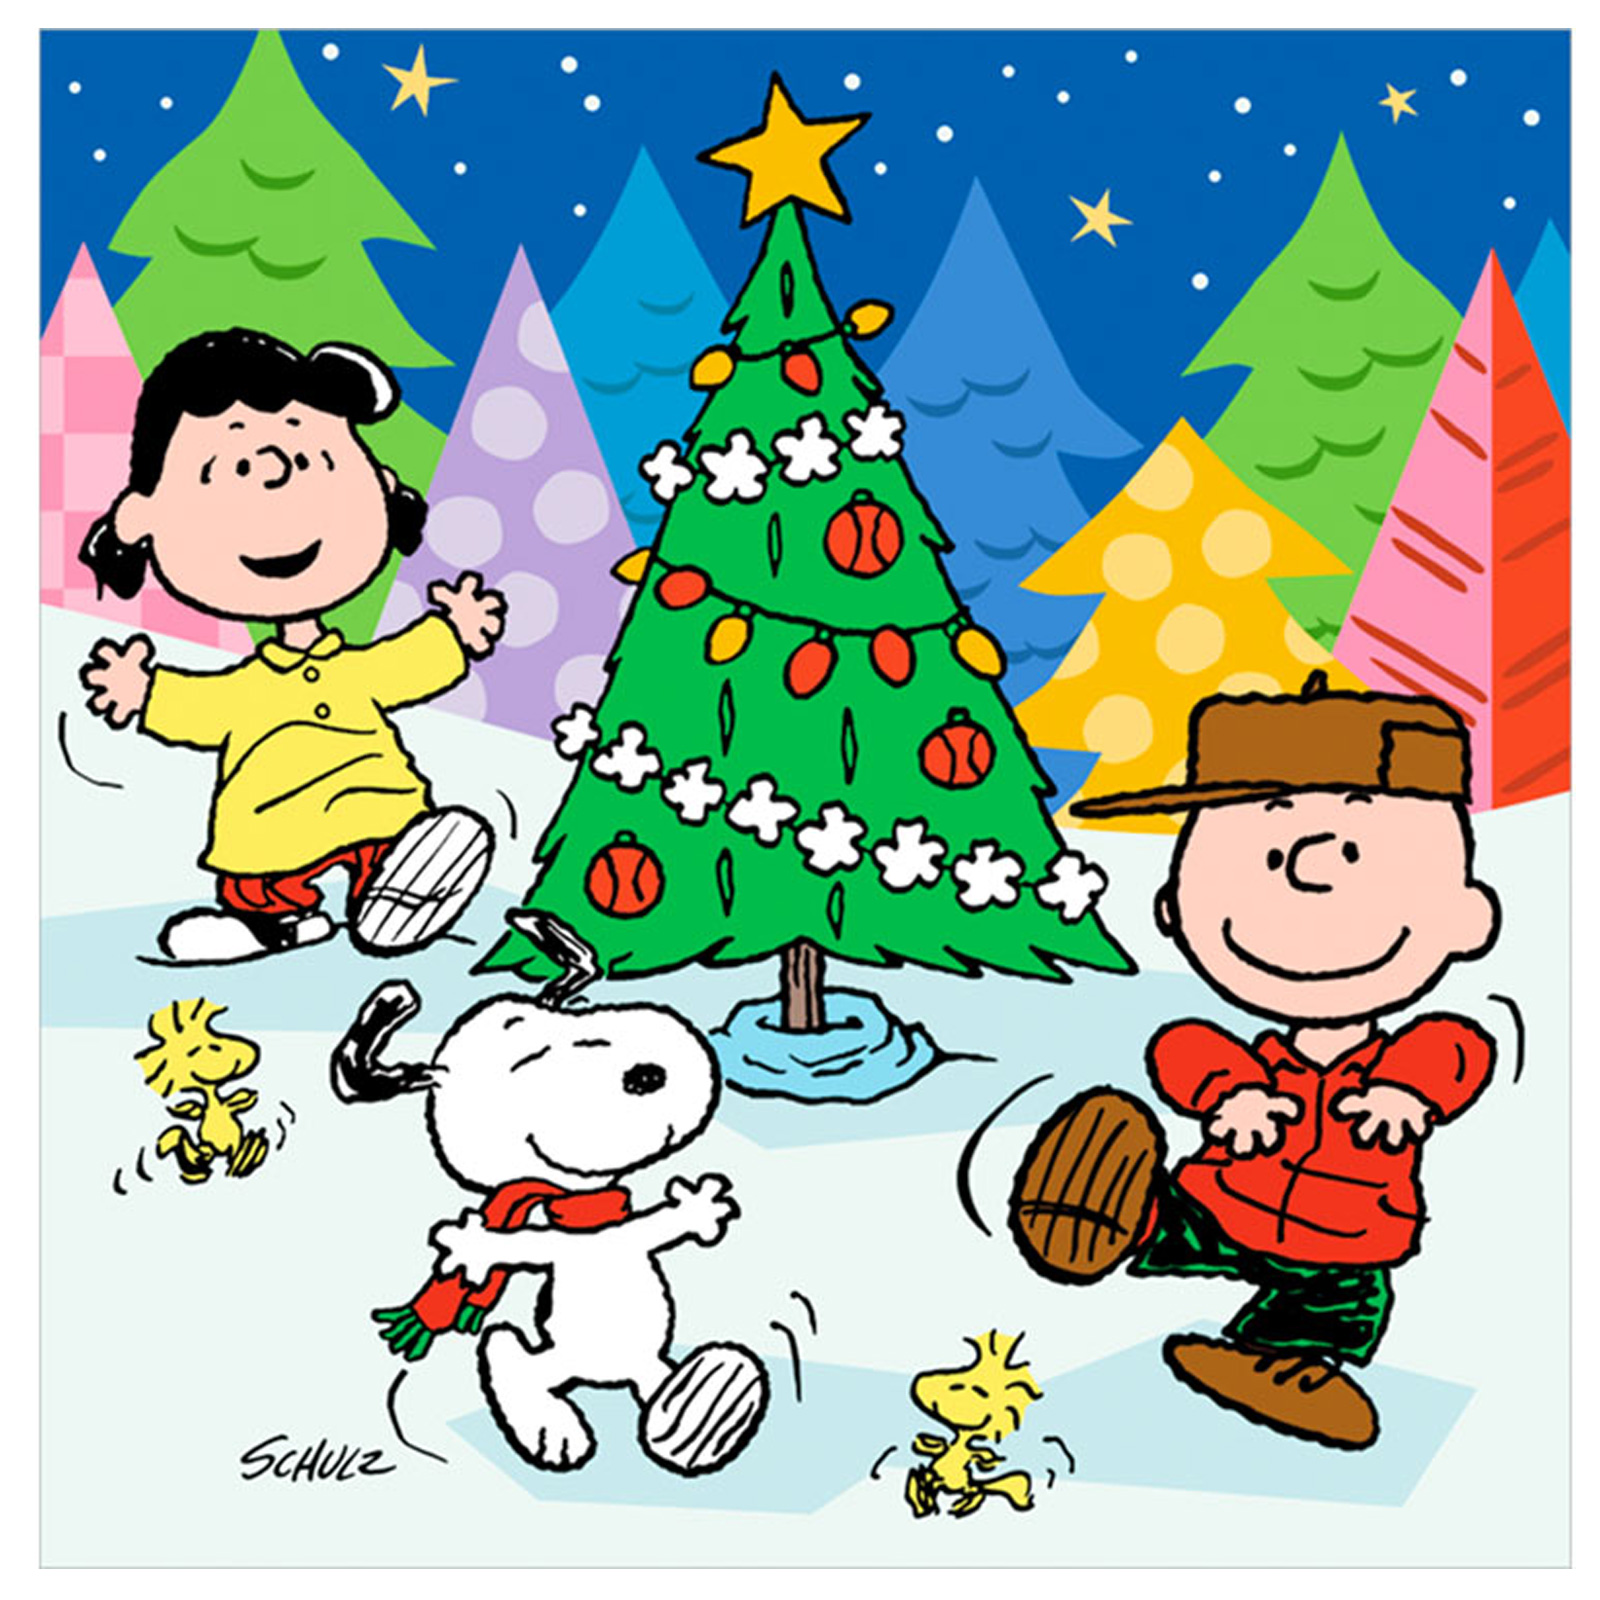 CHARLIE BROWN peanuts comics snoopy christmas f wallpaper background 1600x1600